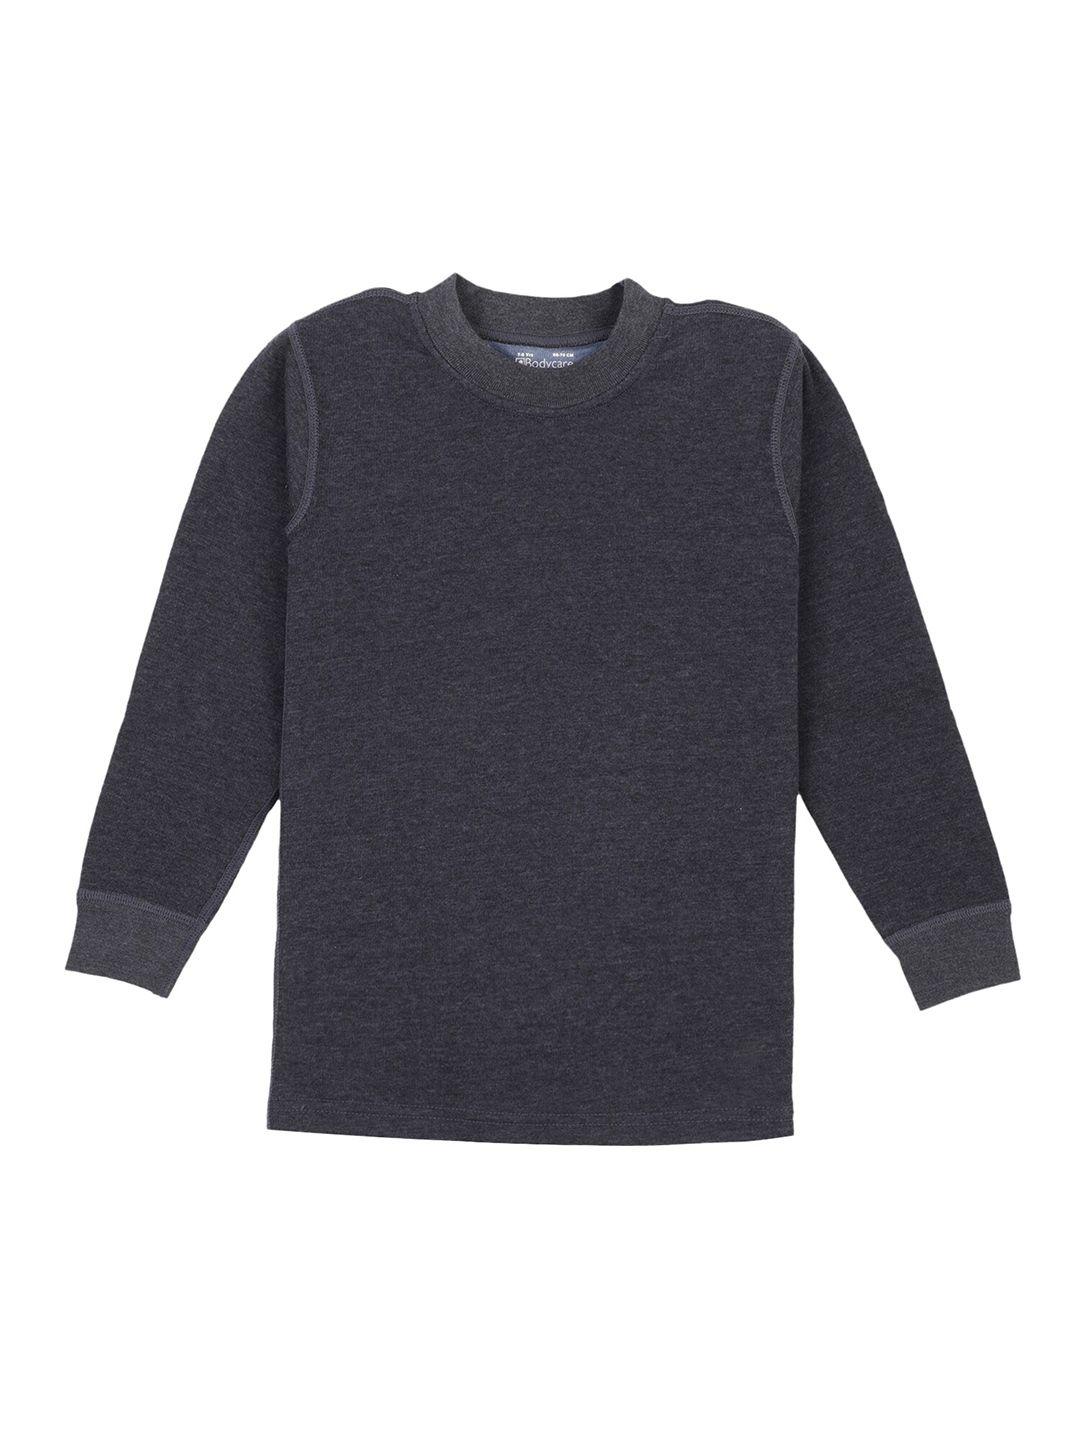 bodycare-kids-boys-grey-solid-thermal-tops